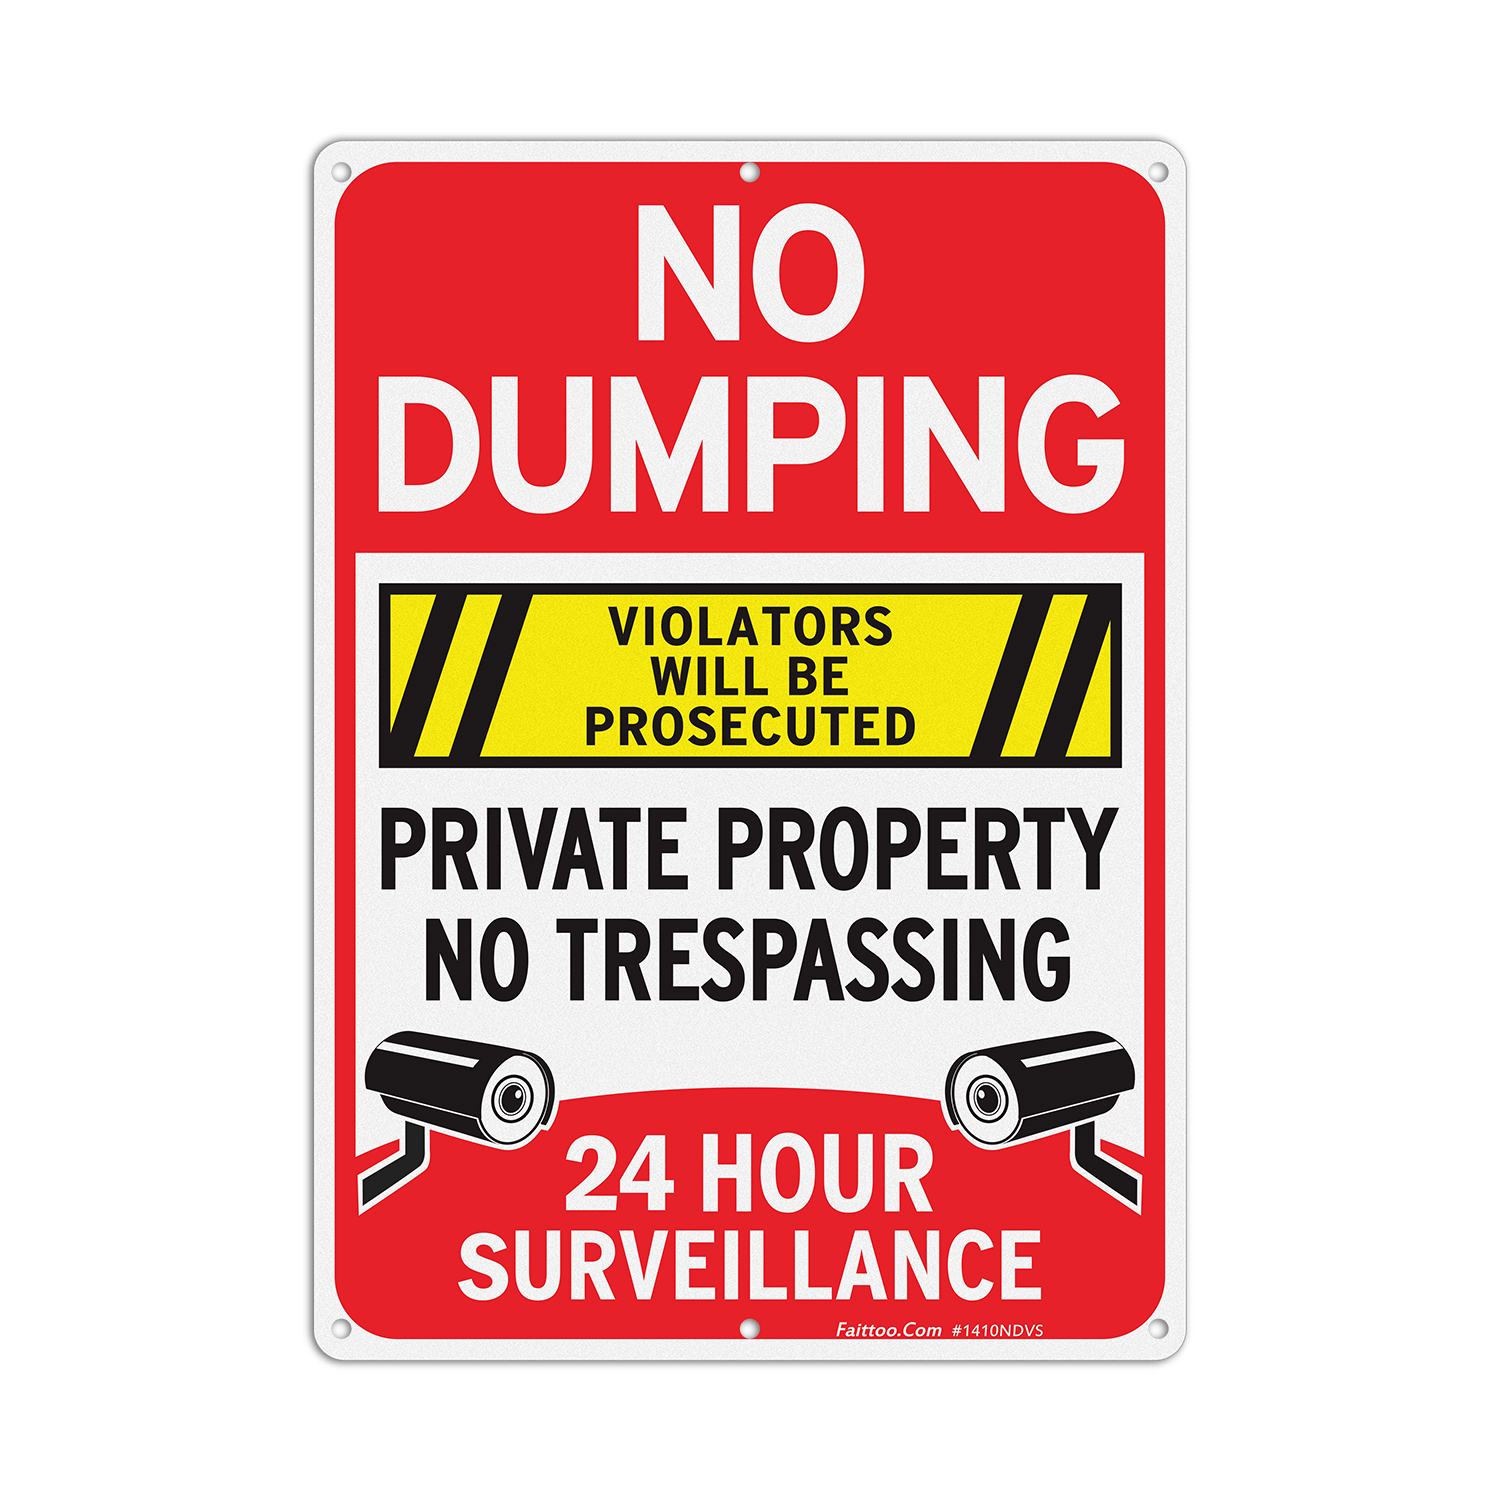 Faittoo No Dumping Sign,"Private Property No Trespassing, 24 Hour Surveillance, Violators Will Be Prosecuted" Sign, 14 x 10 Inch Reflective Aluminum Sign, Weather/Fade Resistant, Easy to Install